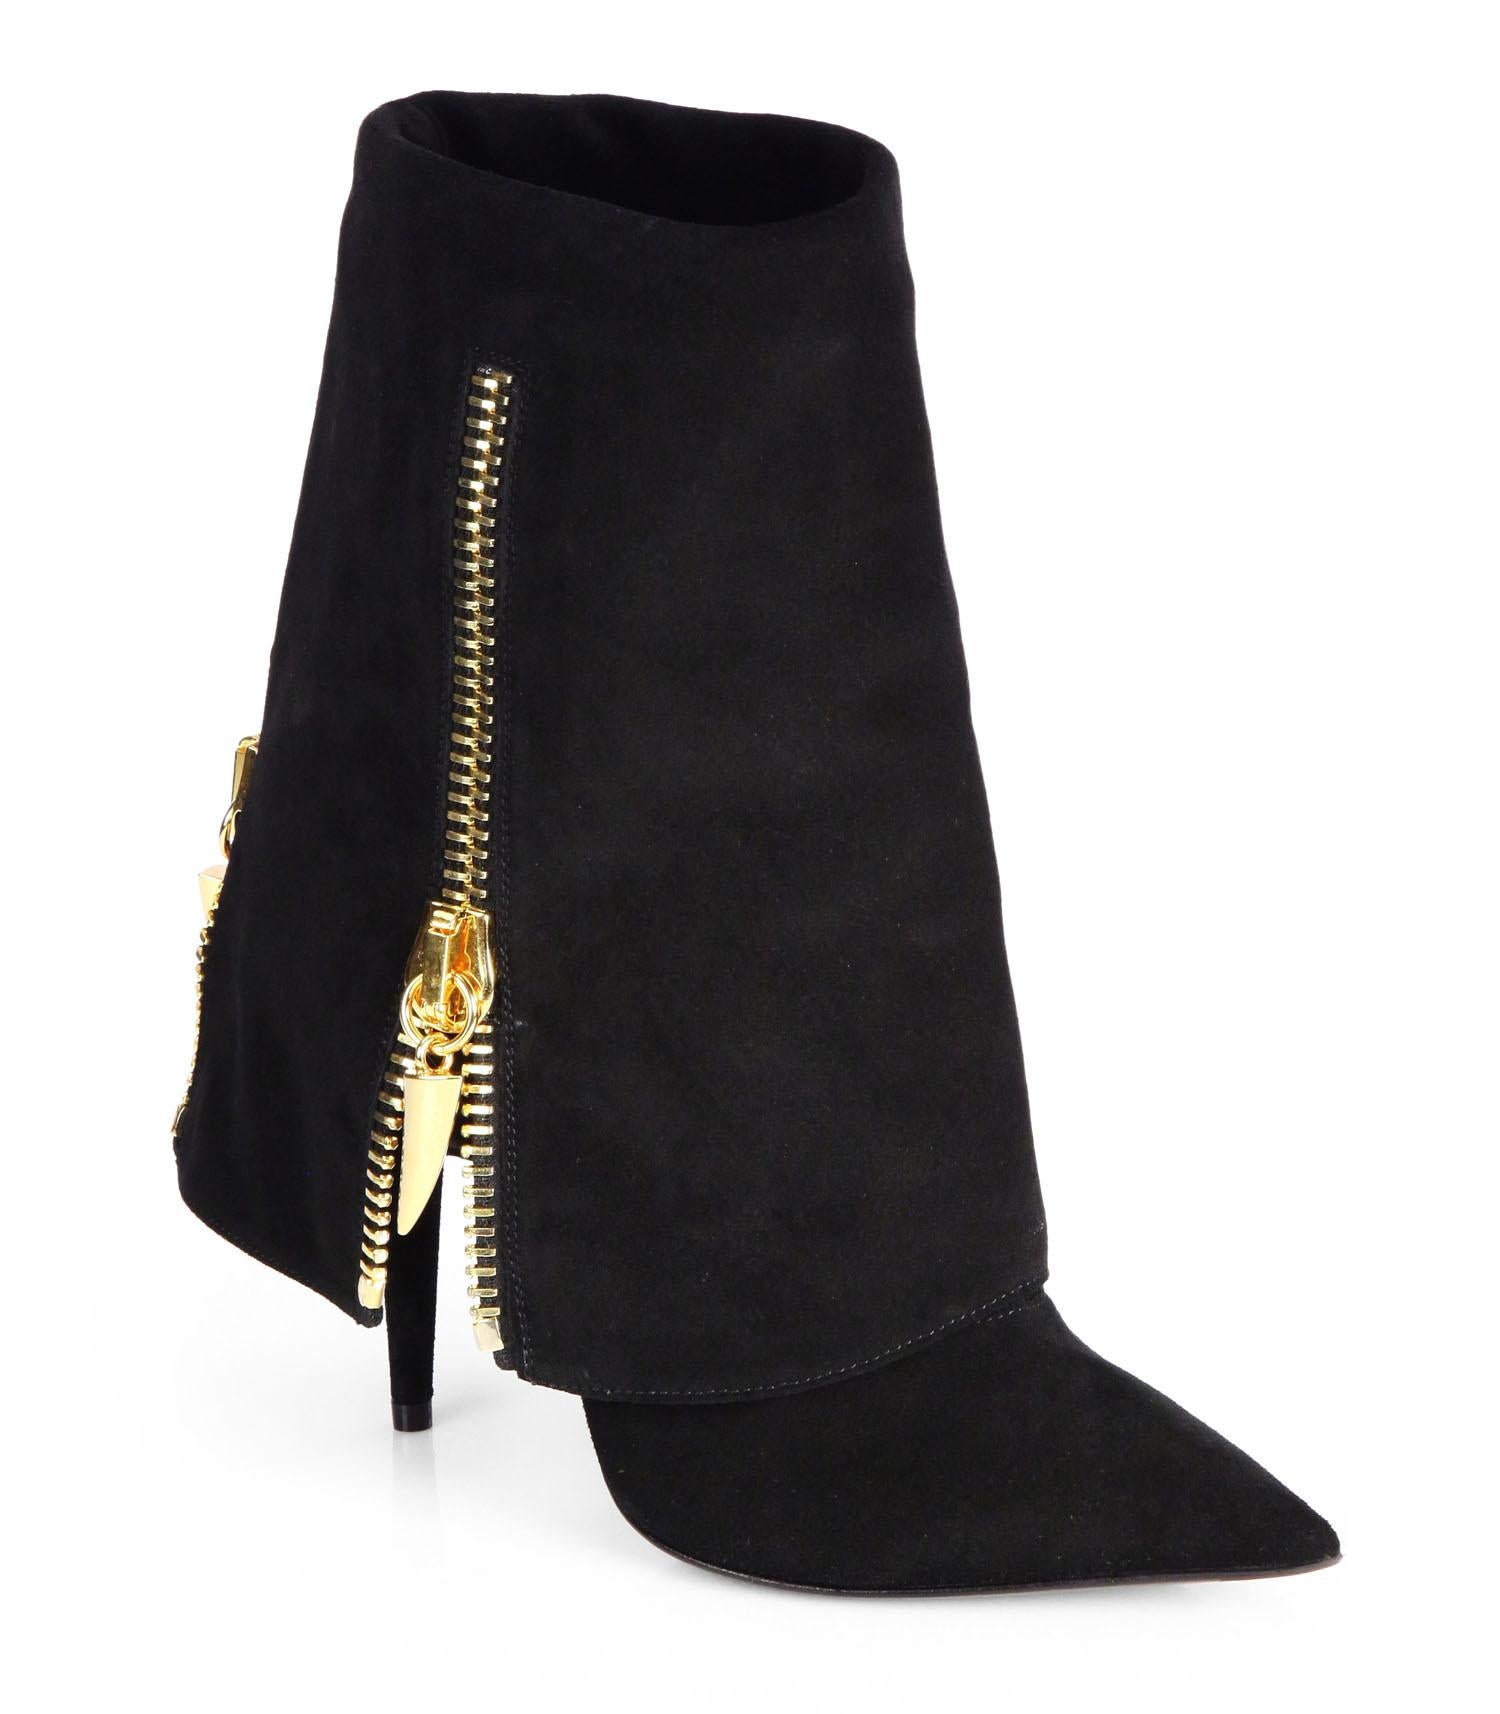 New Giuseppe Zanotti Women's Fold-Over Mid-Calf Boots
Designer size 39
Edgy gold-tone zippers upgrade these fold-over suede boots to statement-making status.
Self-covered heel - 4¼ inches, Can be fold-over in different height.
Durable Leather sole,